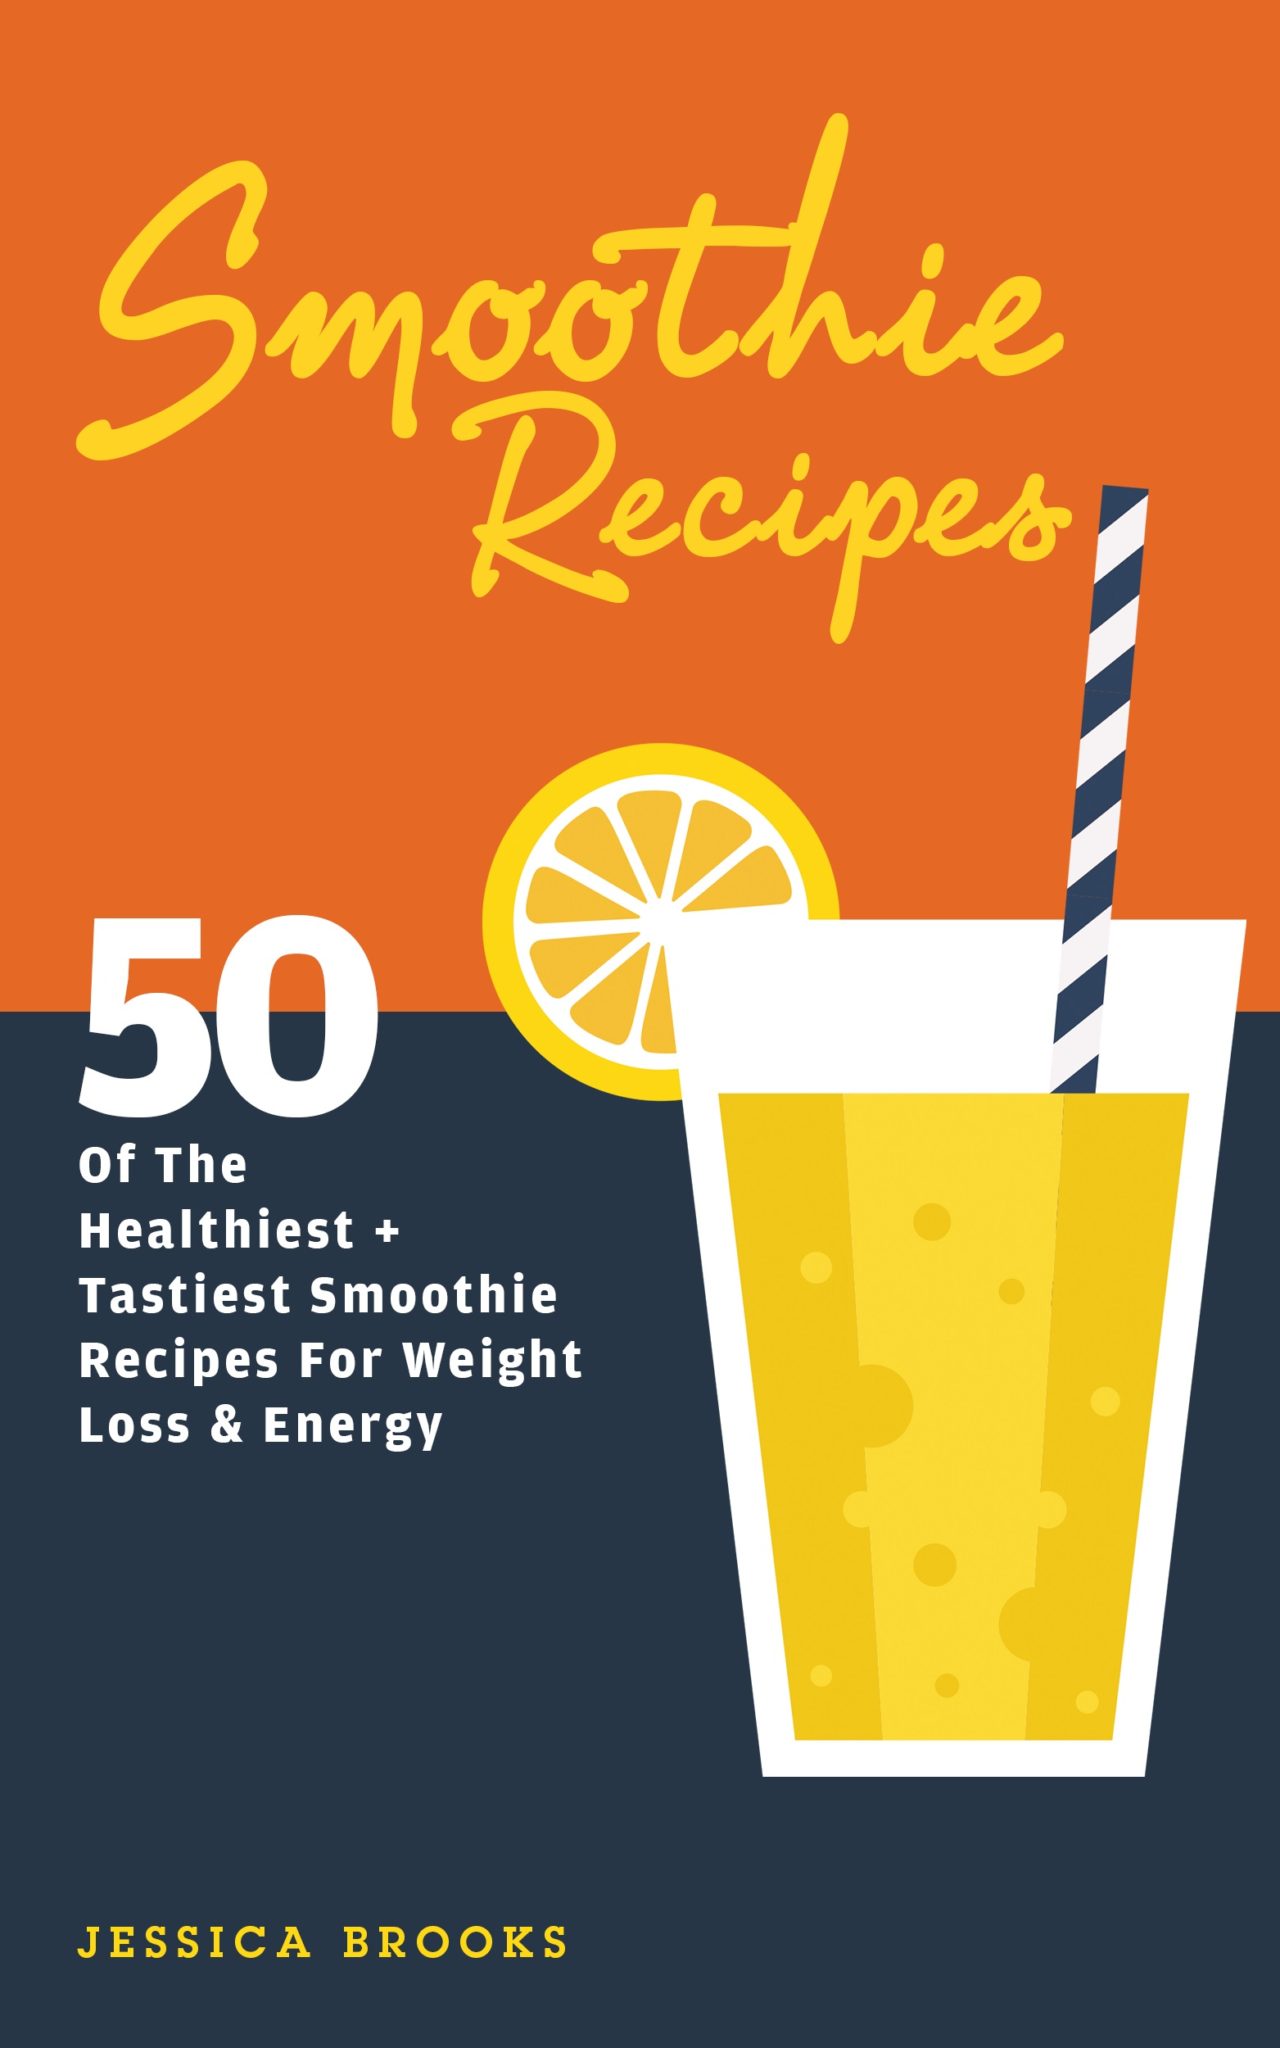 FREE: Smoothies: 50 Of The Healthiest And Tastiest Smoothie Recipes For Weight Loss And Energy by Jessica Brooks